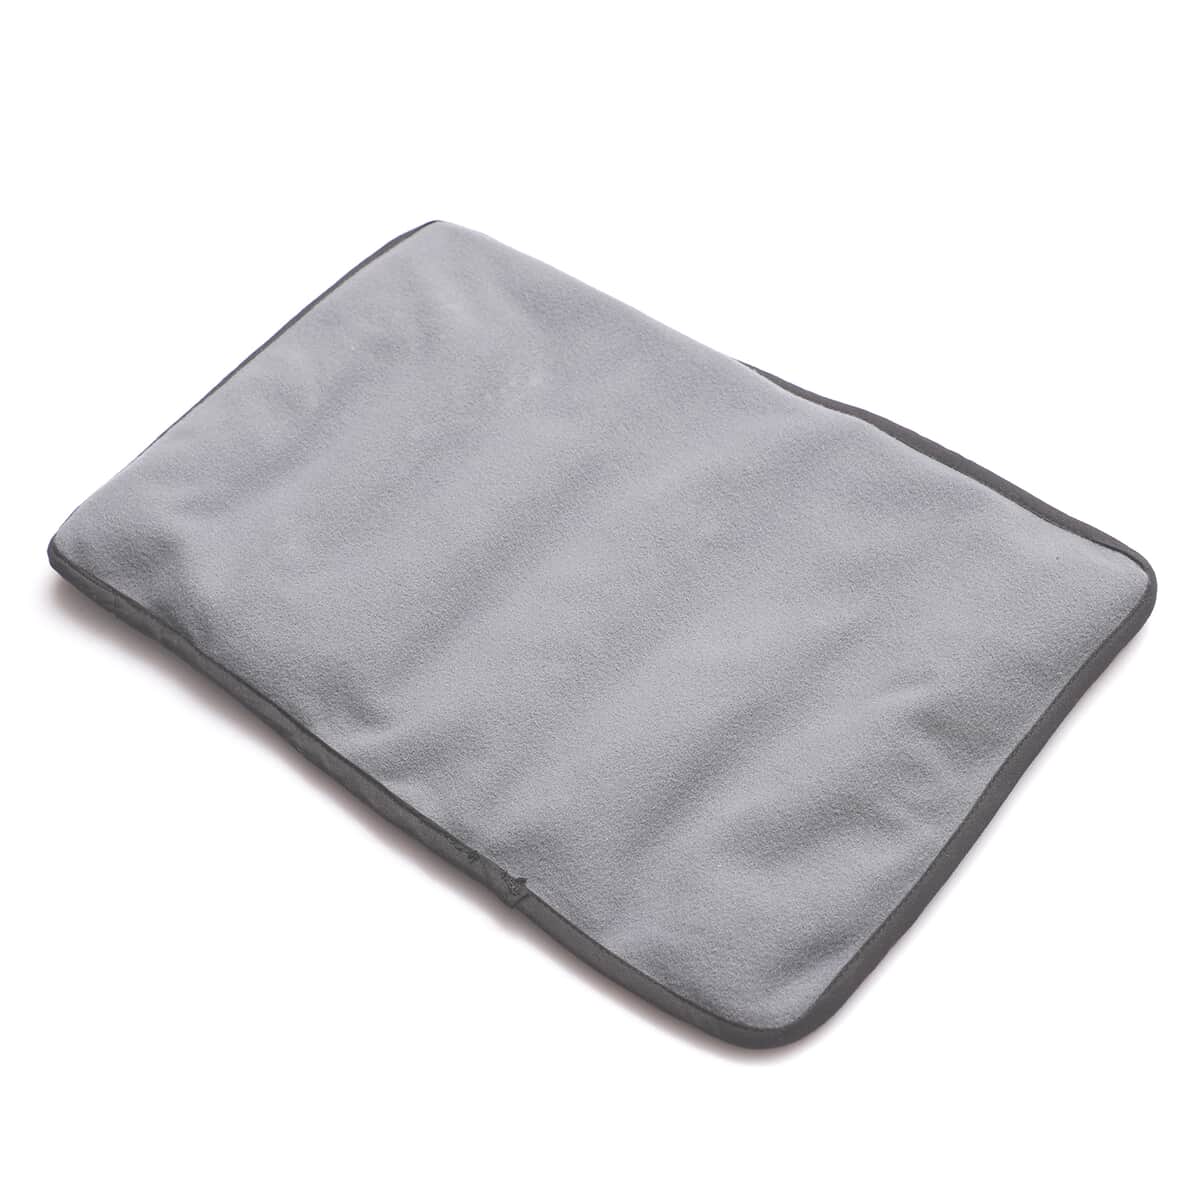 Gray Polyester Travelling Shungite Pillow 1 lb. image number 0